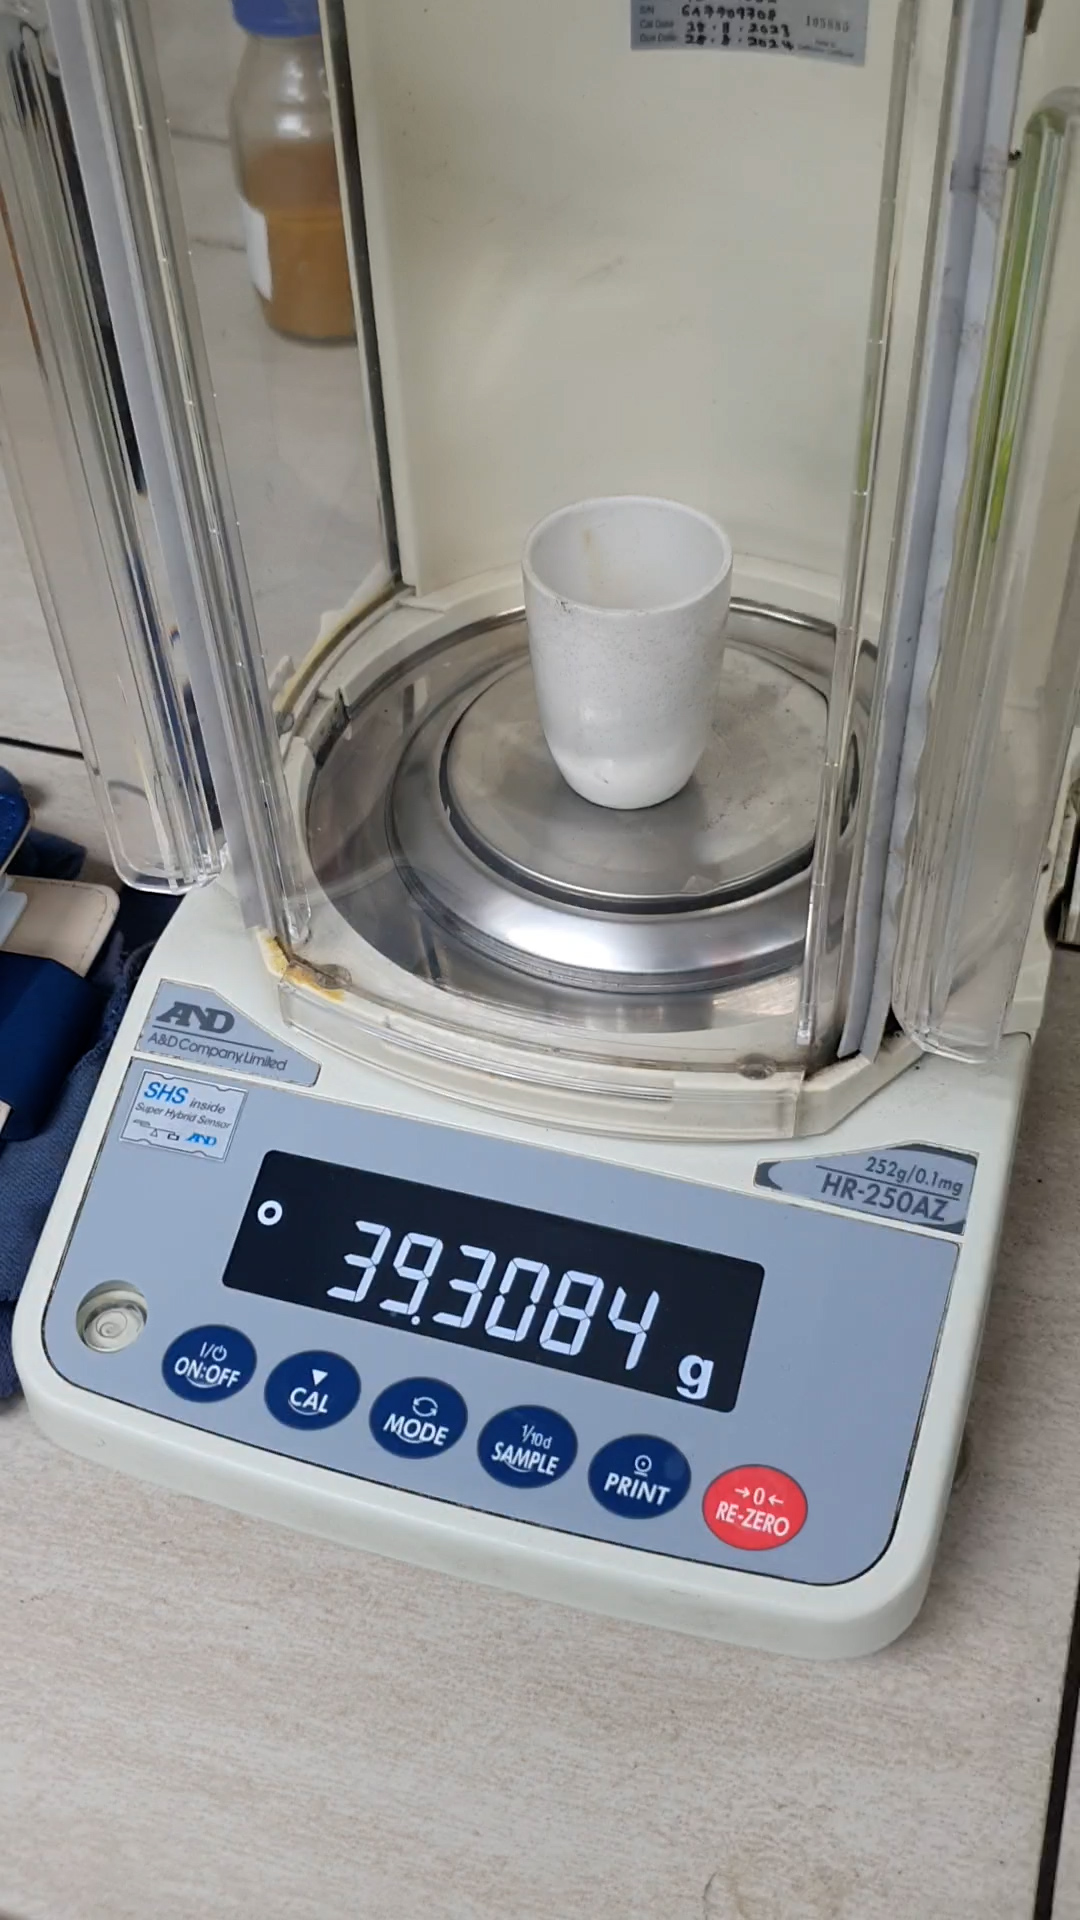 Ultra-precision balance used for weighing solids in filtration testing.